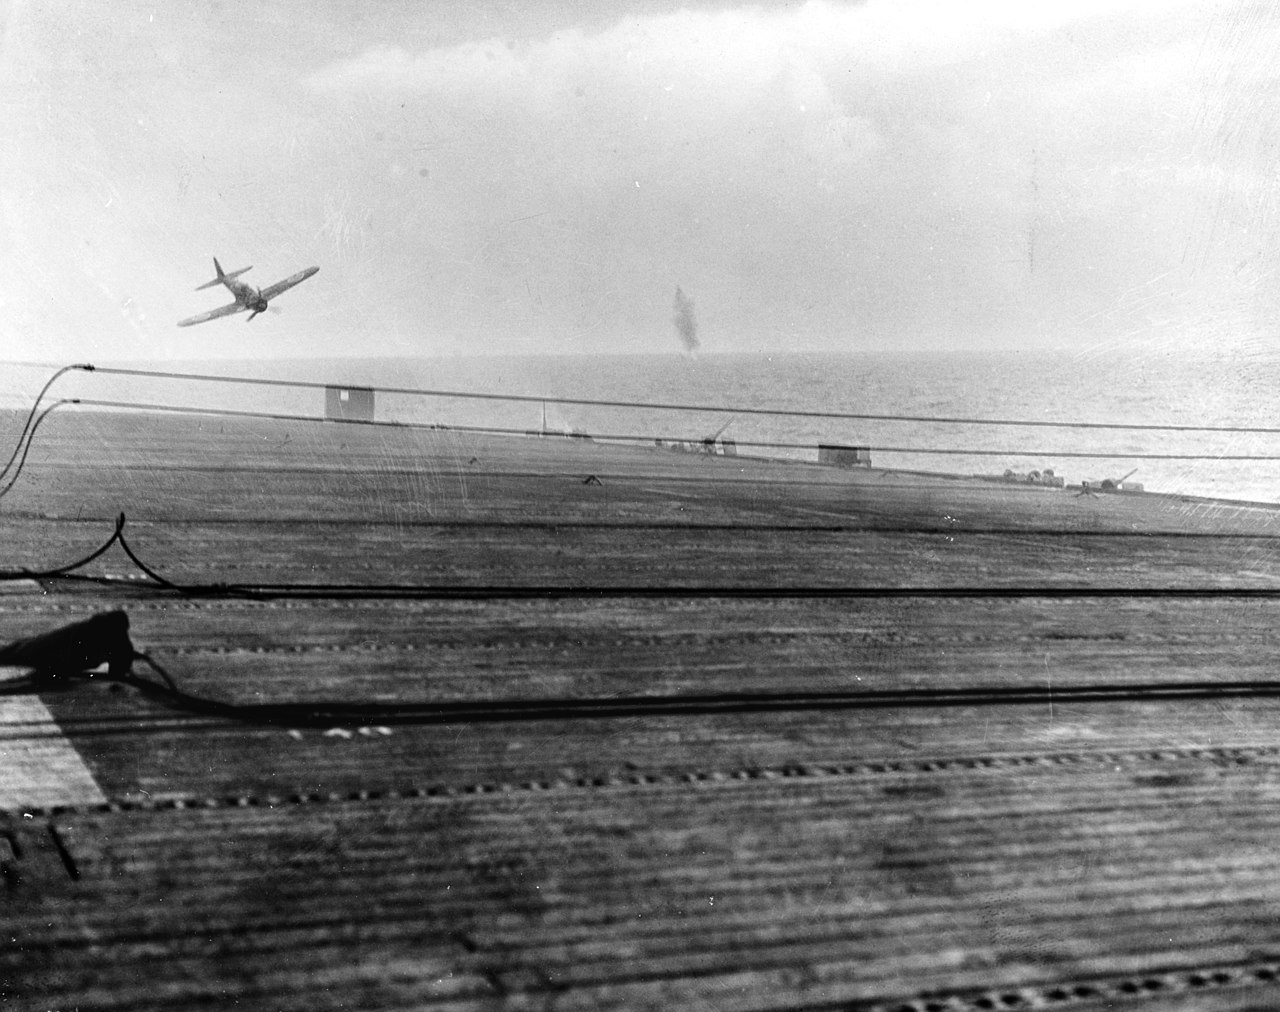 "A Japanese kamikaze pilot in a Mitsubishi A6M5 Model 52 ("Zero") crash dives on the U.S. Navy escort carrier USS White Plains (CVE-66) on 25 October 1944. The aircraft missed the flight deck and impacted the water just off the port quarter of the ship." (Naval History and Heritage Command 80-G-288882)